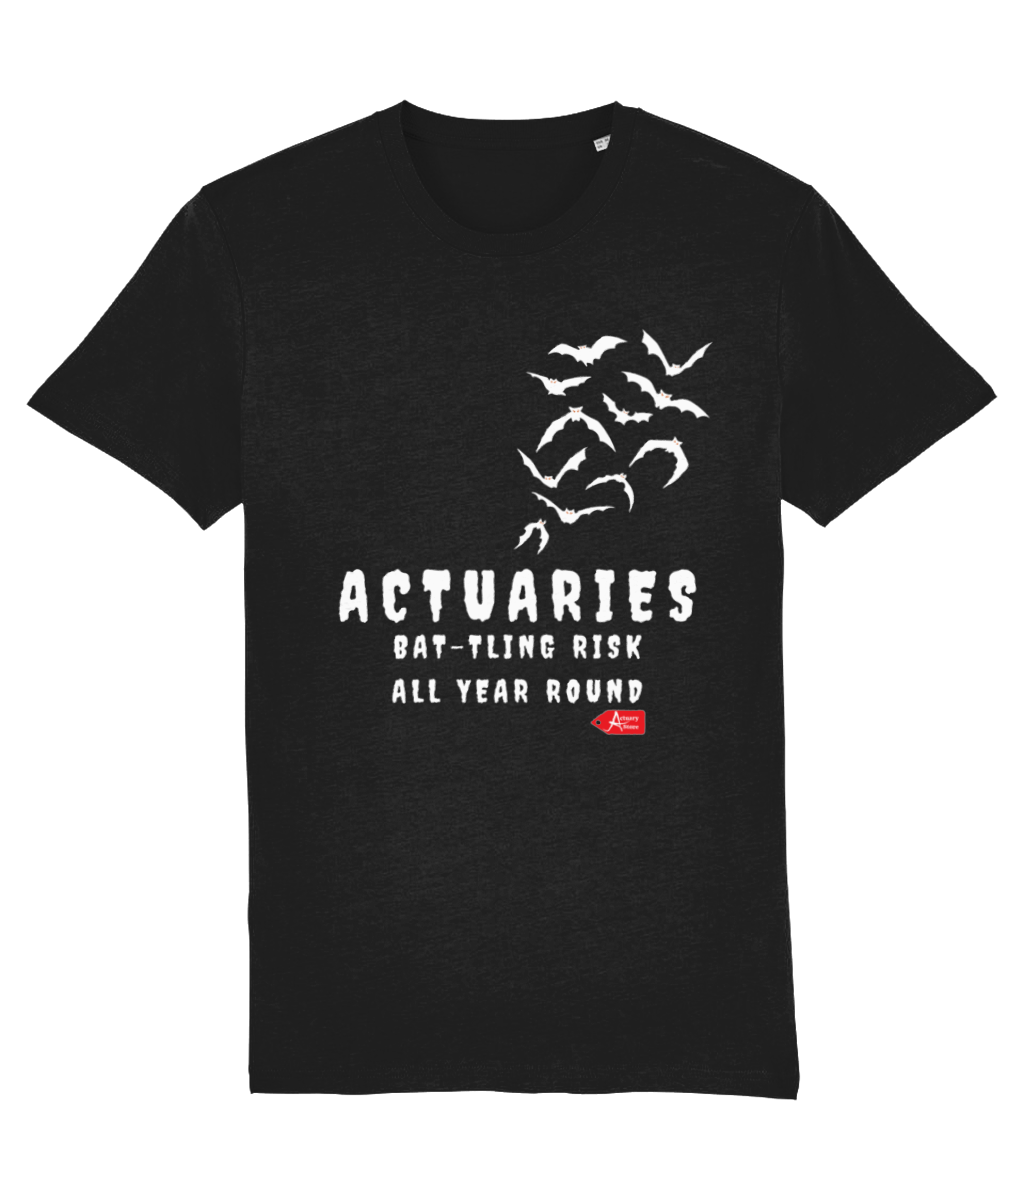 Actuaries Bat-tling Risk All Year Round Halloween T-shirt